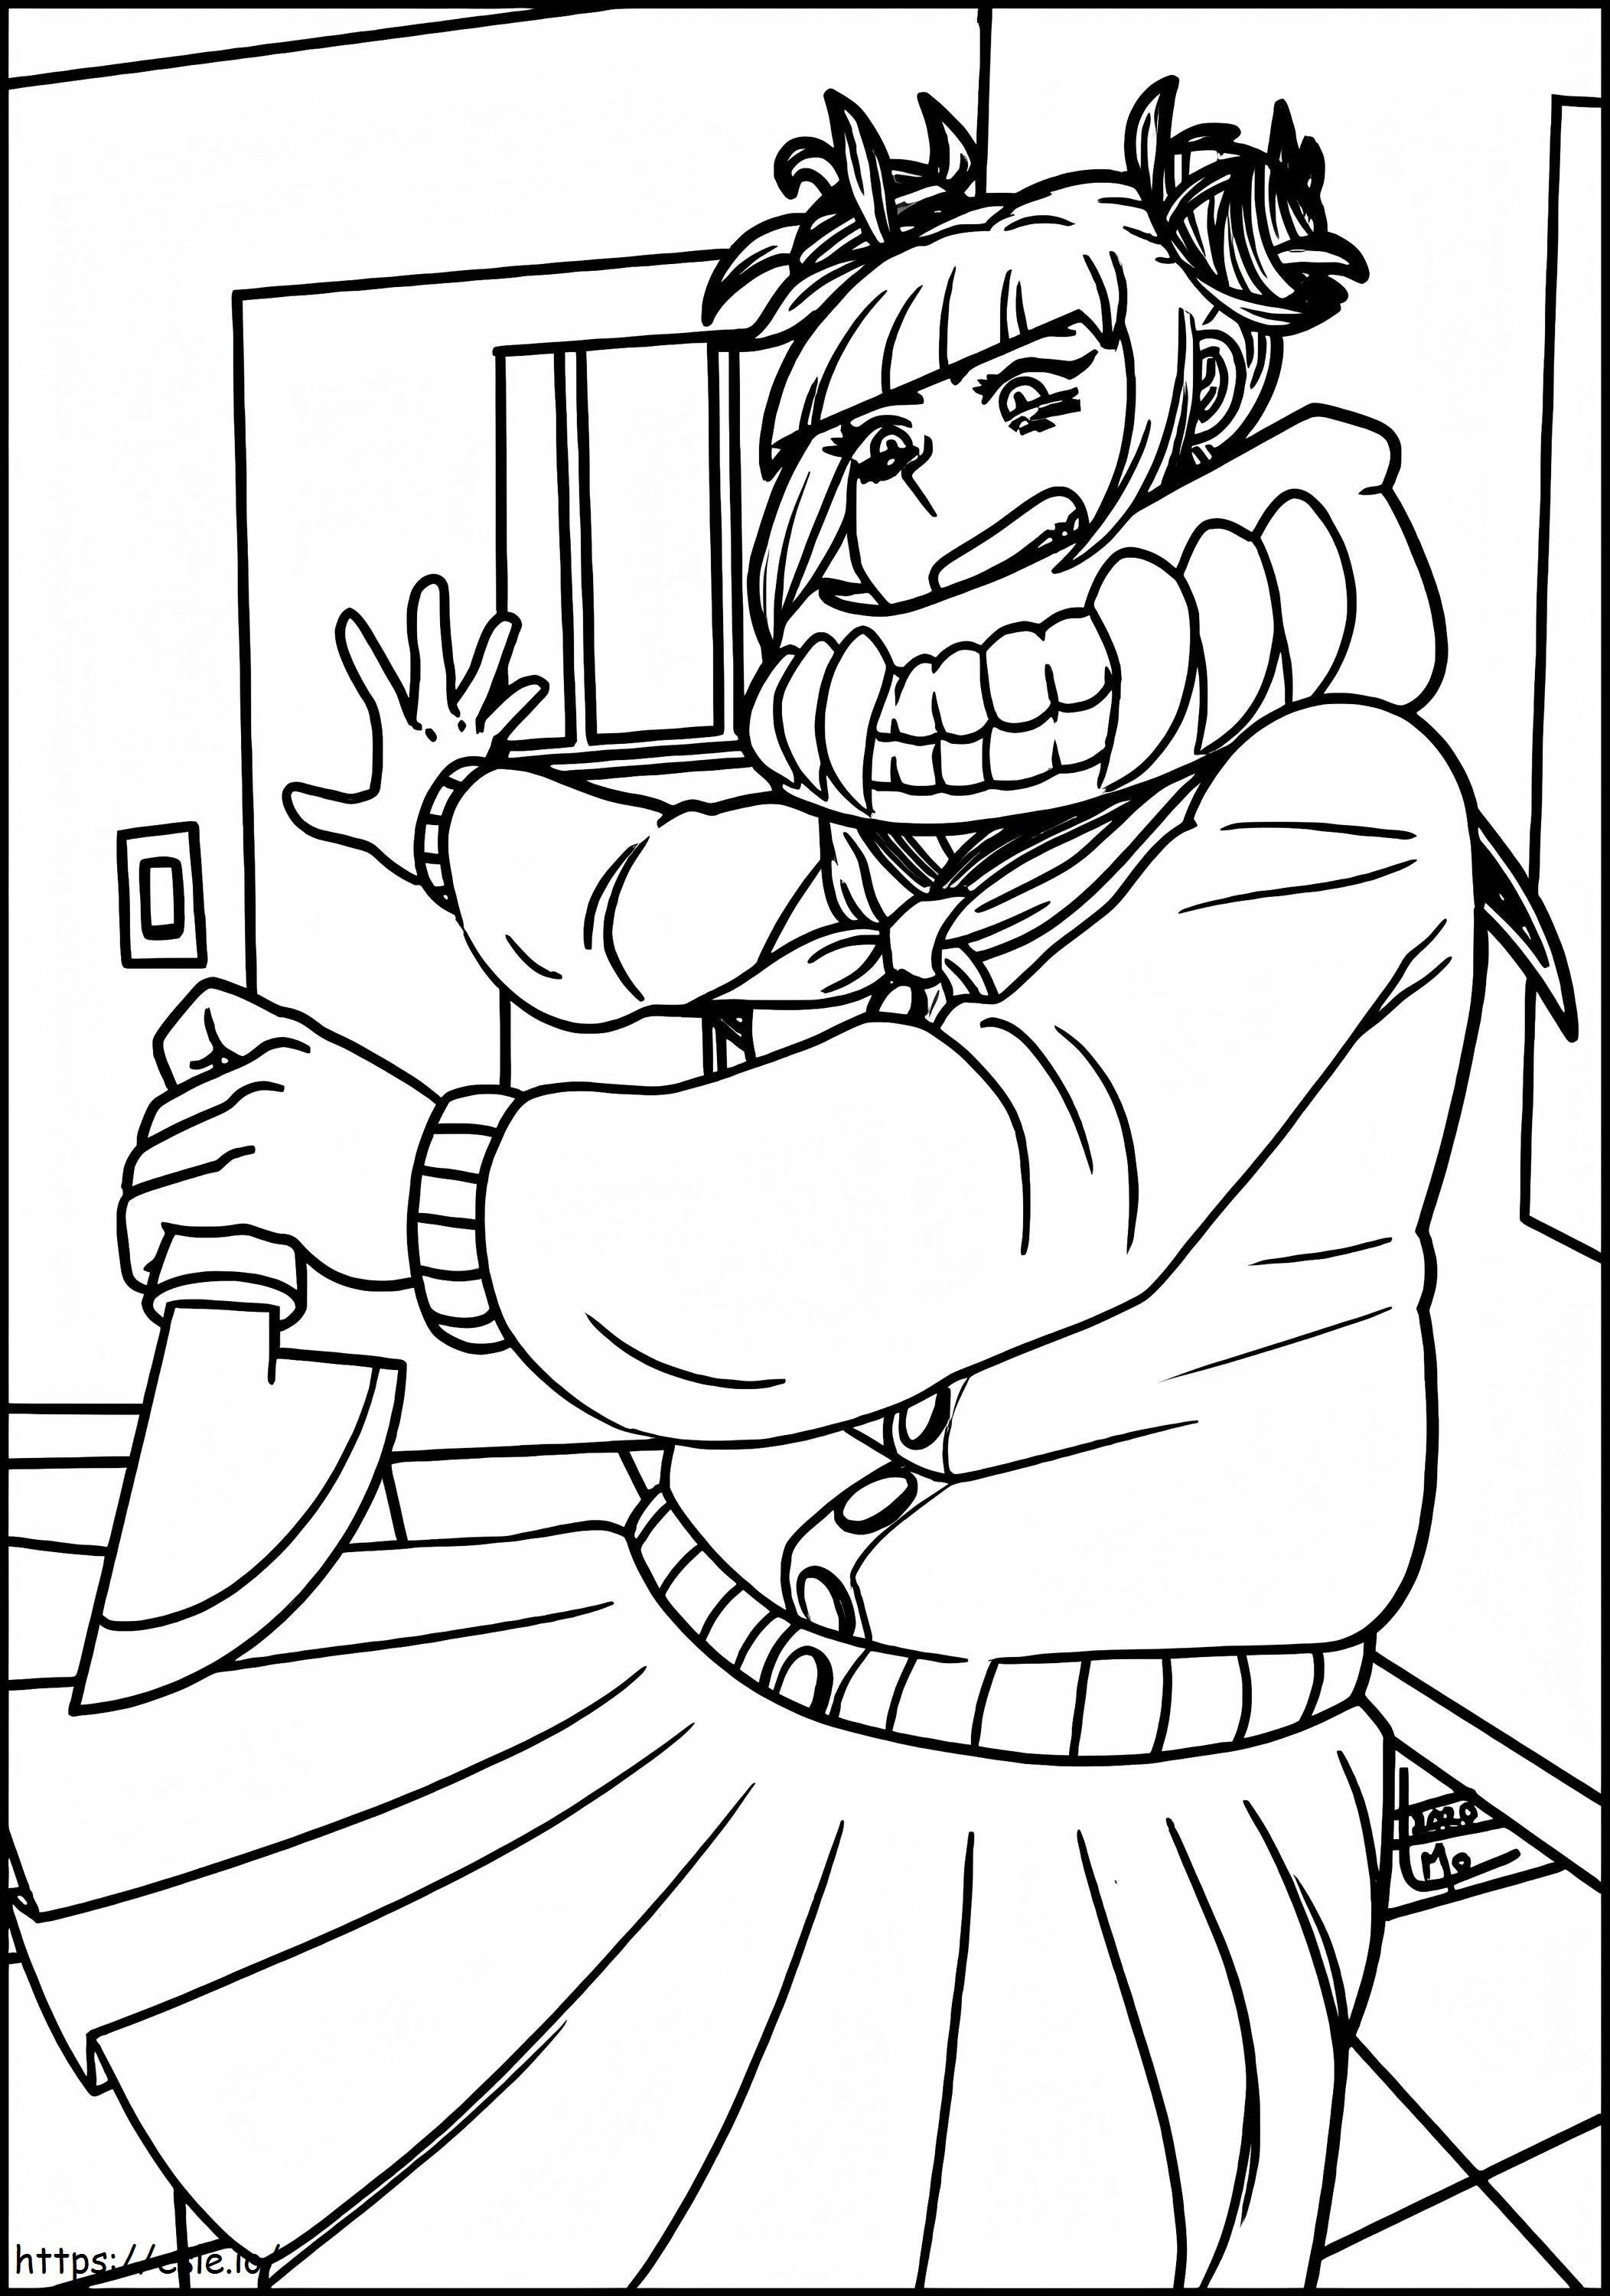 Himiko Toga With A Knife coloring page